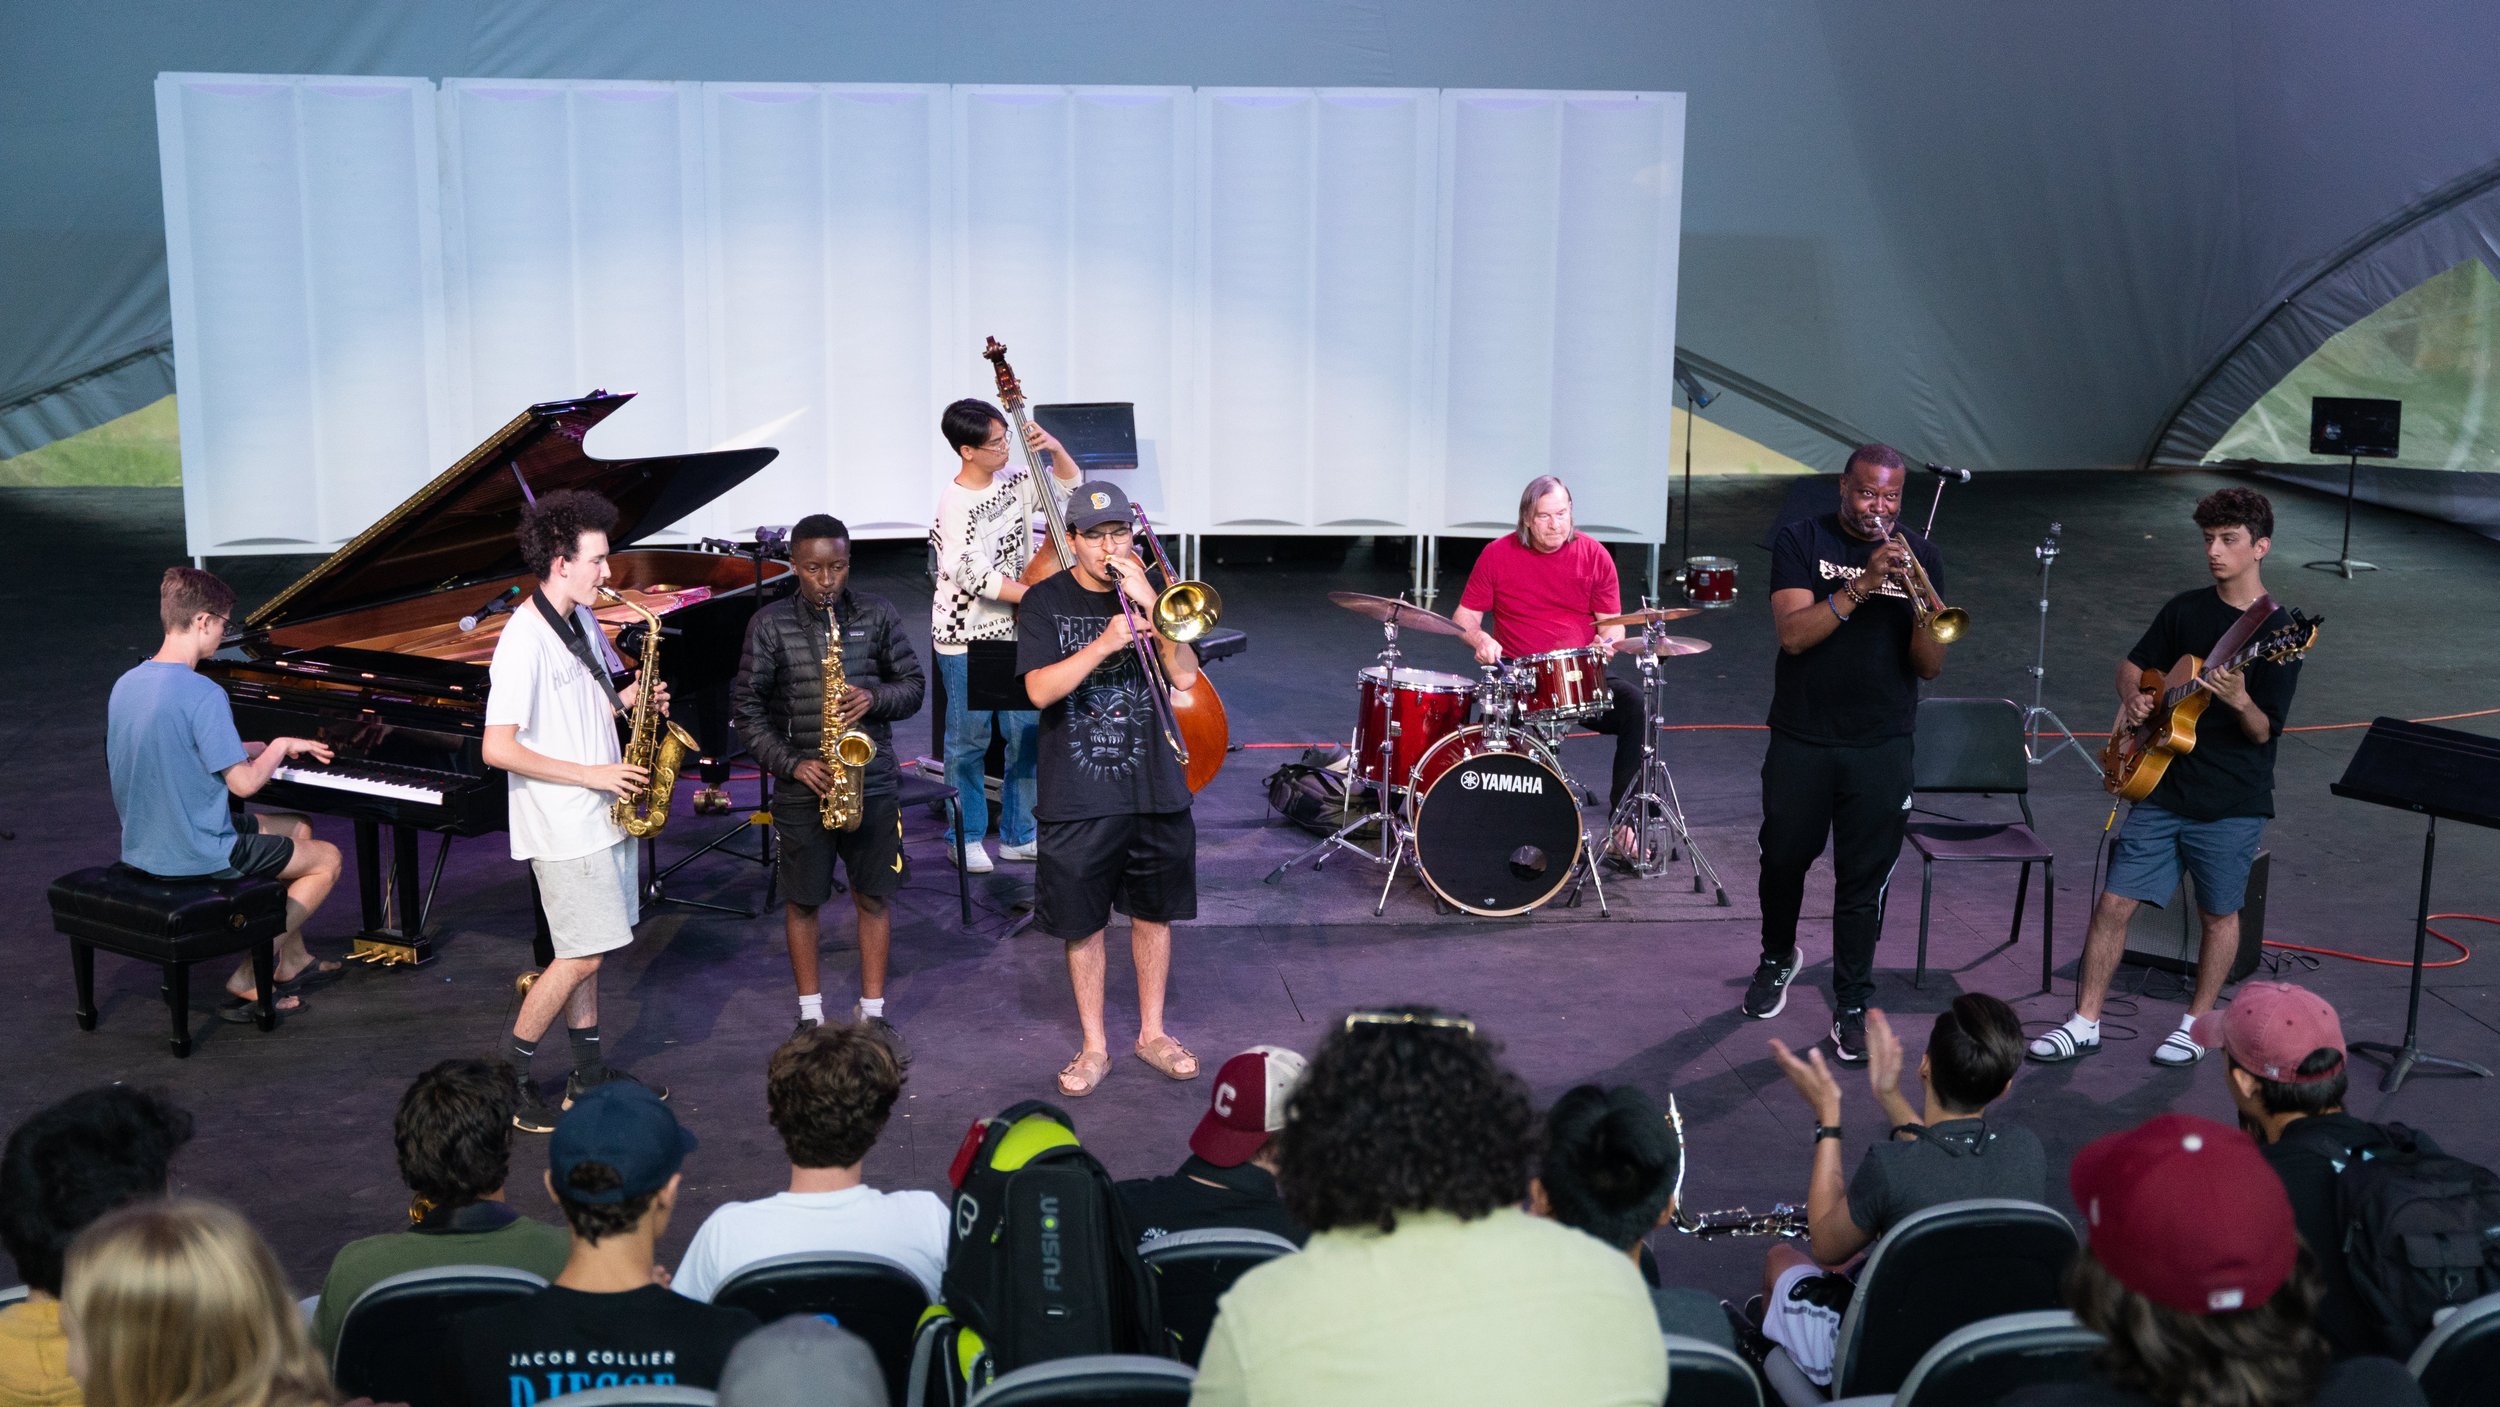   Photo by Austin Kruczek: Dan Brubeck, drums and Sean Jones, trumpet jam with some of the student musicians.  